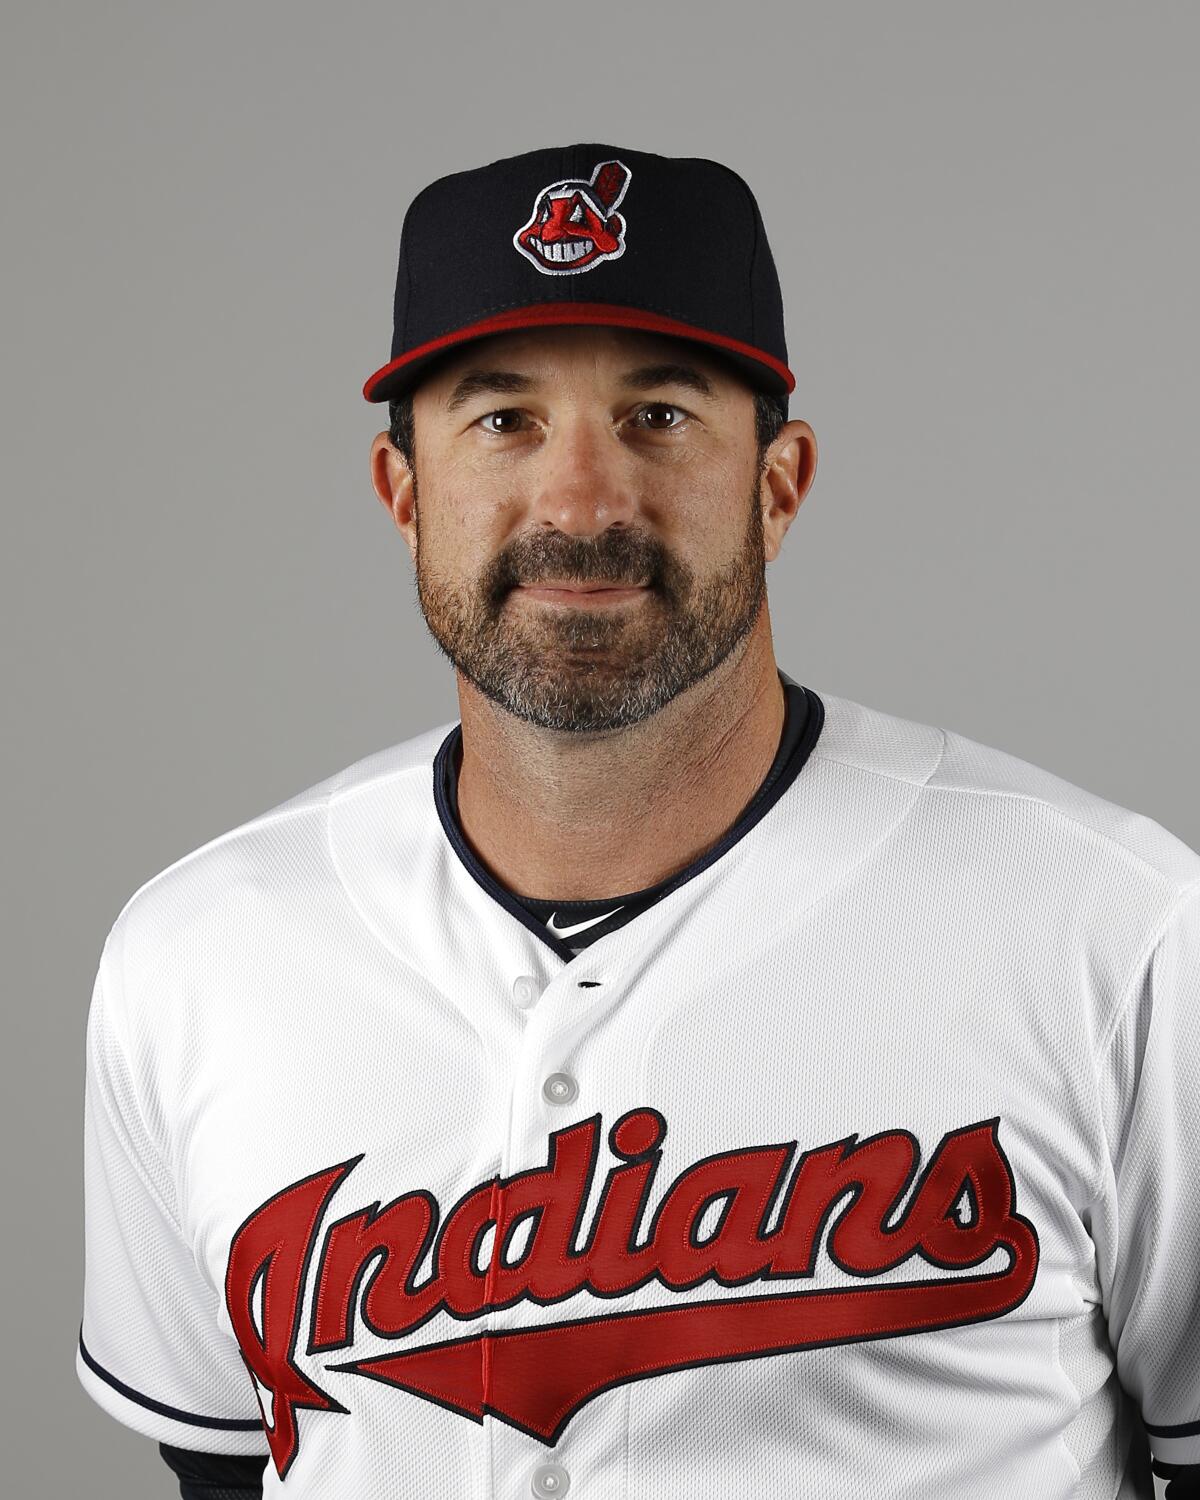 FILE - This is a 2016 file photo showing Mickey Callaway of the Cleveland Indians baseball team. Indians president of baseball operations Chris Antonetti said he couldn't comment on previous remarks made about Mickey Callaway's behavior due to Major League Baseball's ongoing investigation into allegations the team's former pitching coach sexually harassed women. Antonetti joined manager Terry Francona for his Zoom availability on Wednesday, March 3, 2021, a day after a story by The Athletic said several former Indians employees had come forward in the last month to say the team's front office was aware of Callaway's actions. (AP Photo/Morry Gash, File)